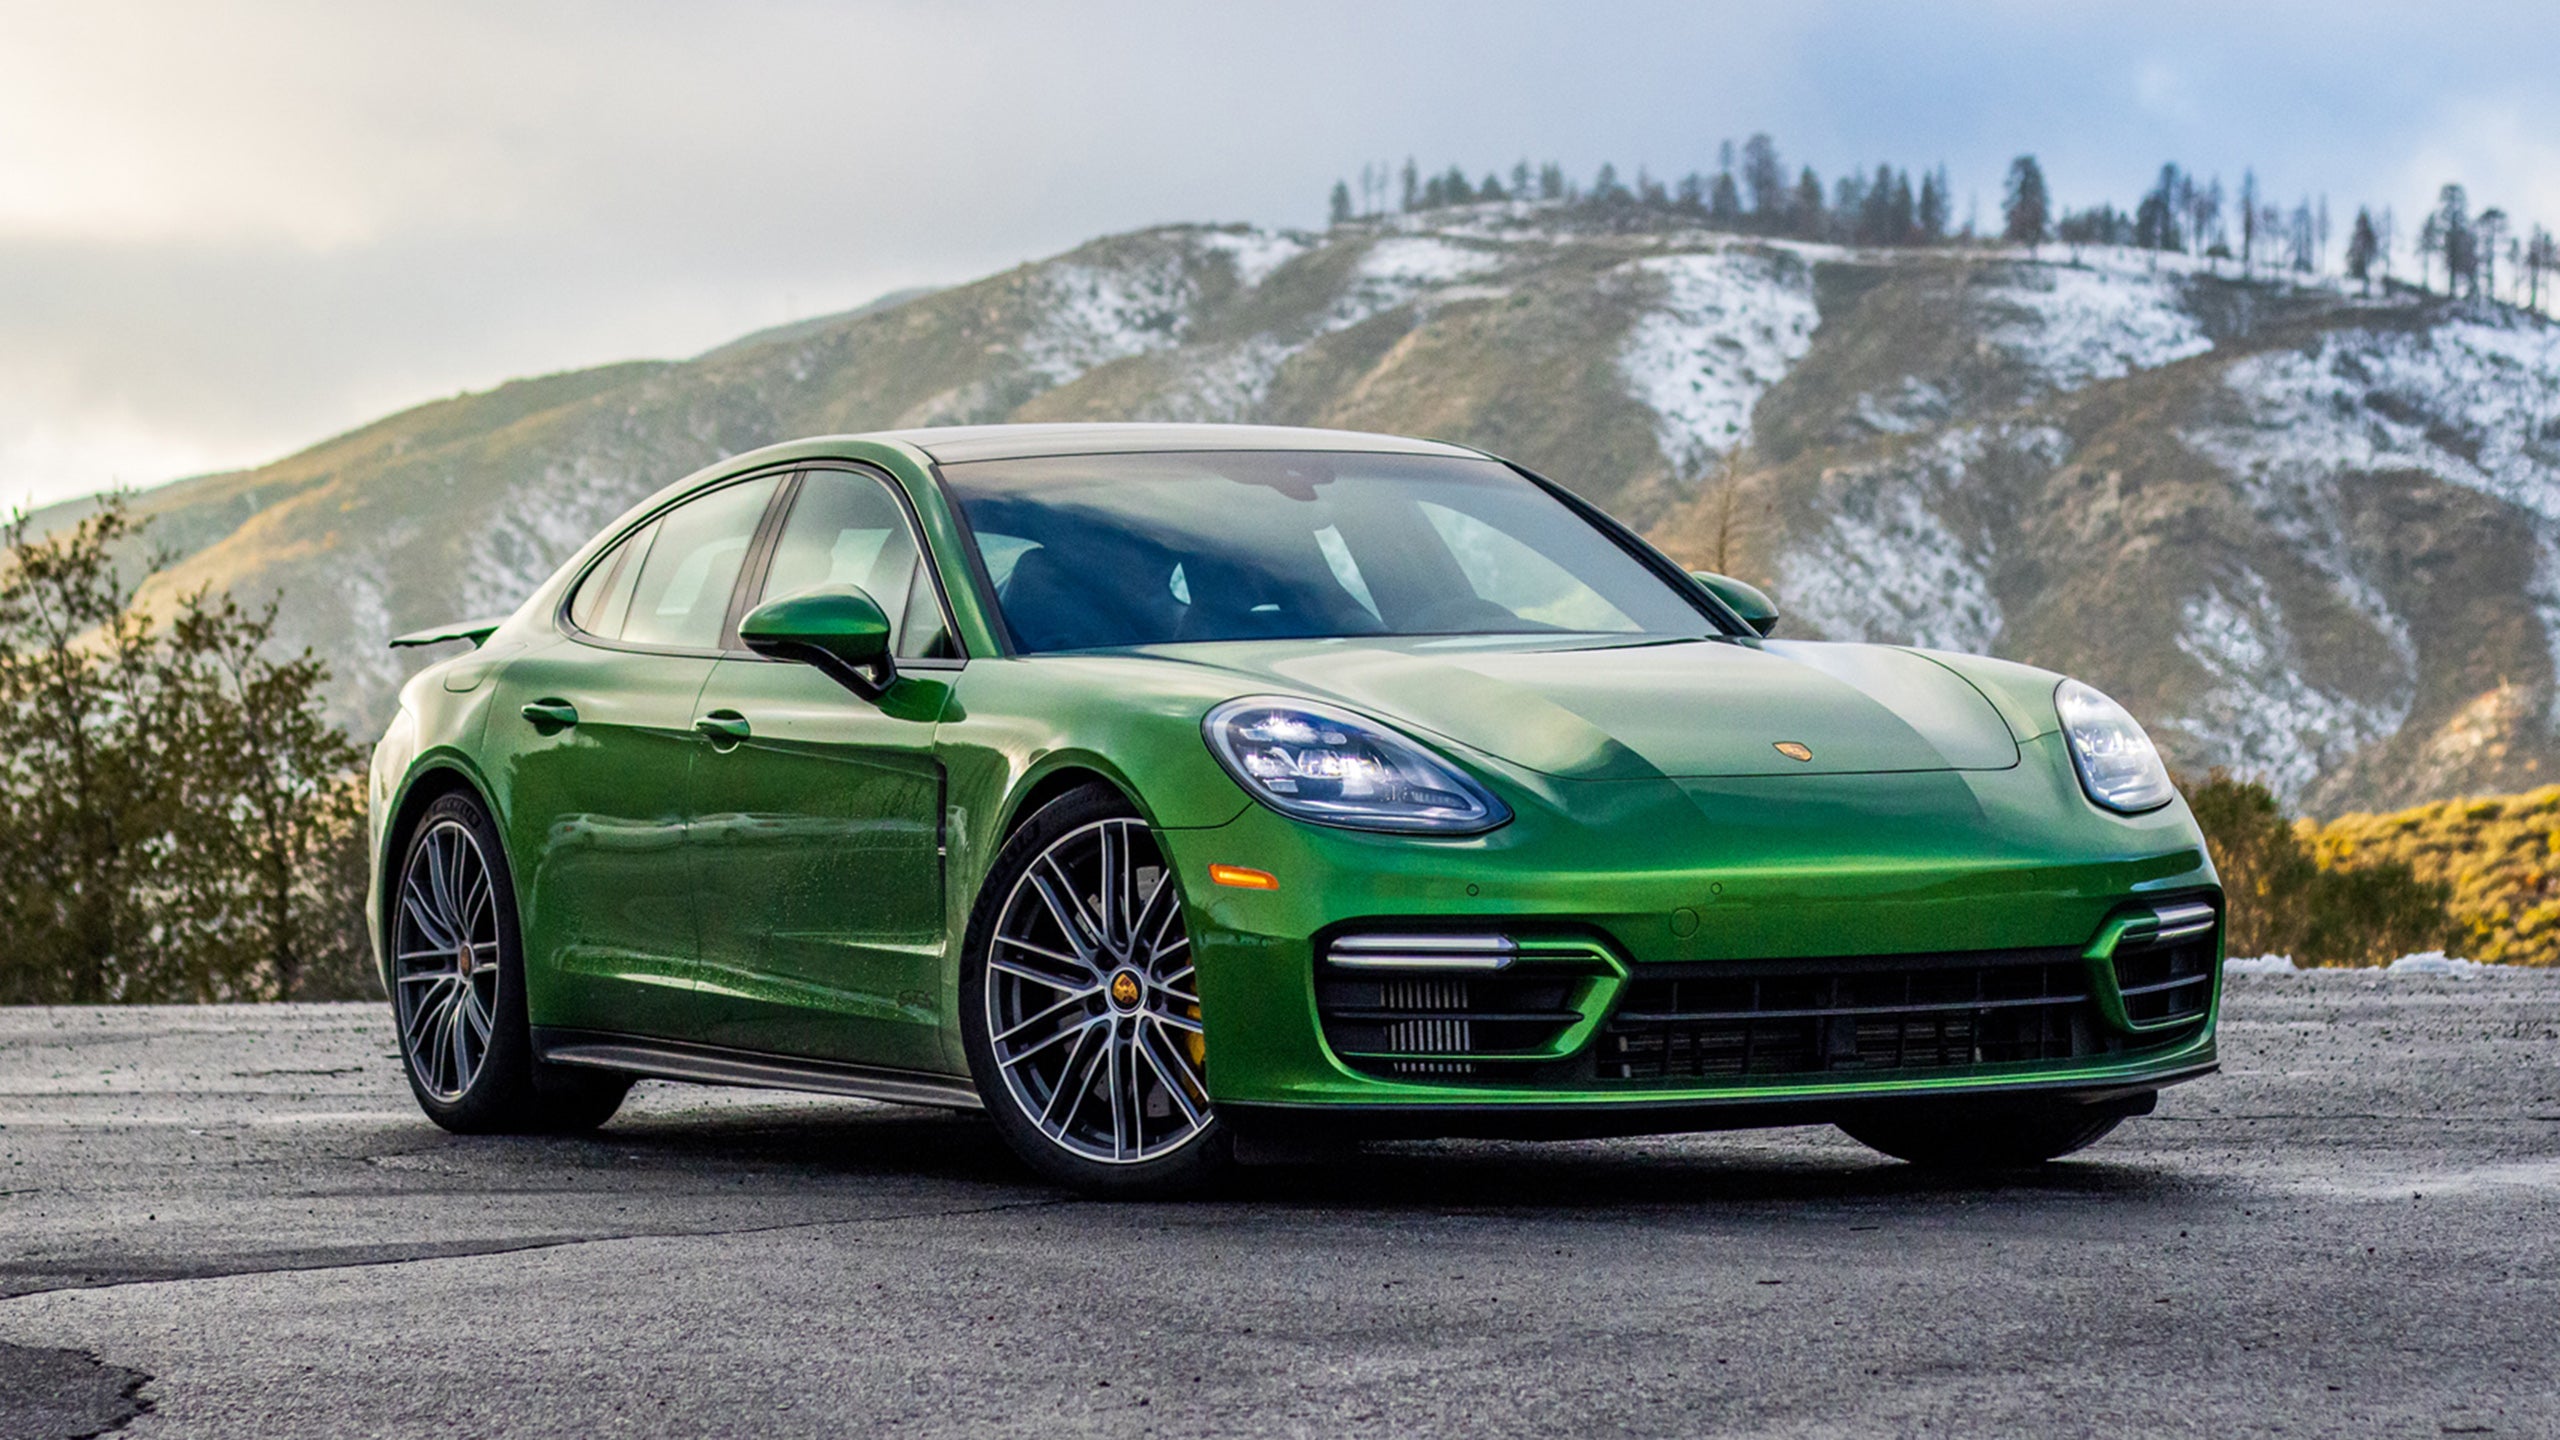 2021 Porsche Panamera GTS Review: The Most Well-Rounded Porsche